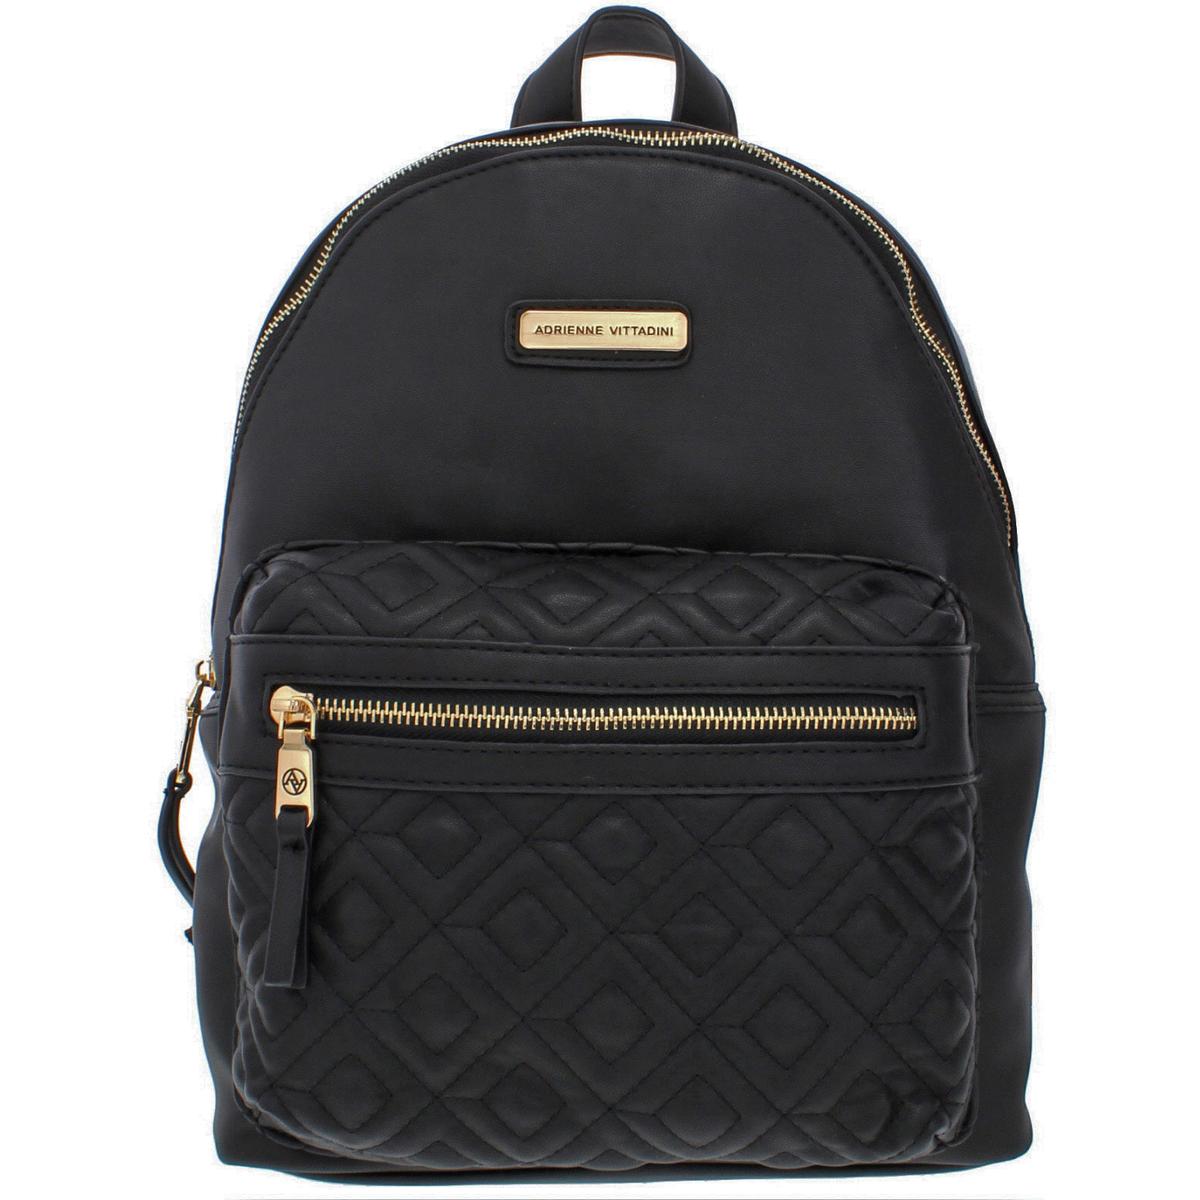 Adrienne Vittadini Womens Black Quilted Faux Leather Backpack Medium ...